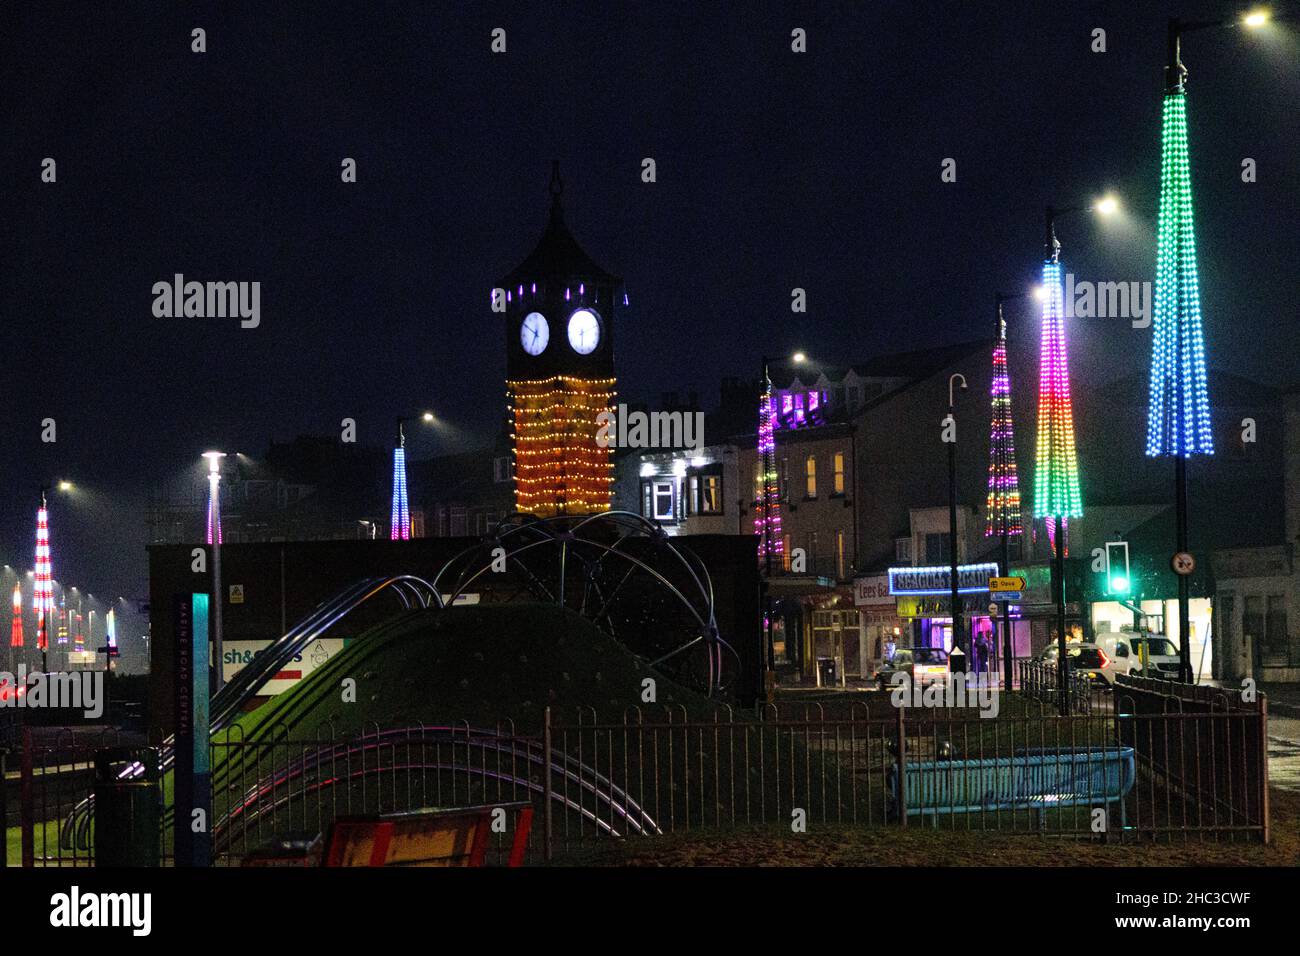 Morecambe, Lancashire, United Kingdom 23rd December 2021 Morecambe is being lit up by extra seasonal lighting this Christmas which is part of the 2021 Morecambe Business Improvement District (BID) Sparkle, A preview of what can be done if funding from the Welcome Back Fund and Lancashire County Council can be secured, From 1919 until 1996 until budget cuts and safety issues caused them to be cancelled Morecambe host its own illuminations. The Current scheme will see low energy programable LED lights which will illuminate Queen, Nelson, Pedder, Market and Victoria St Stock Photo